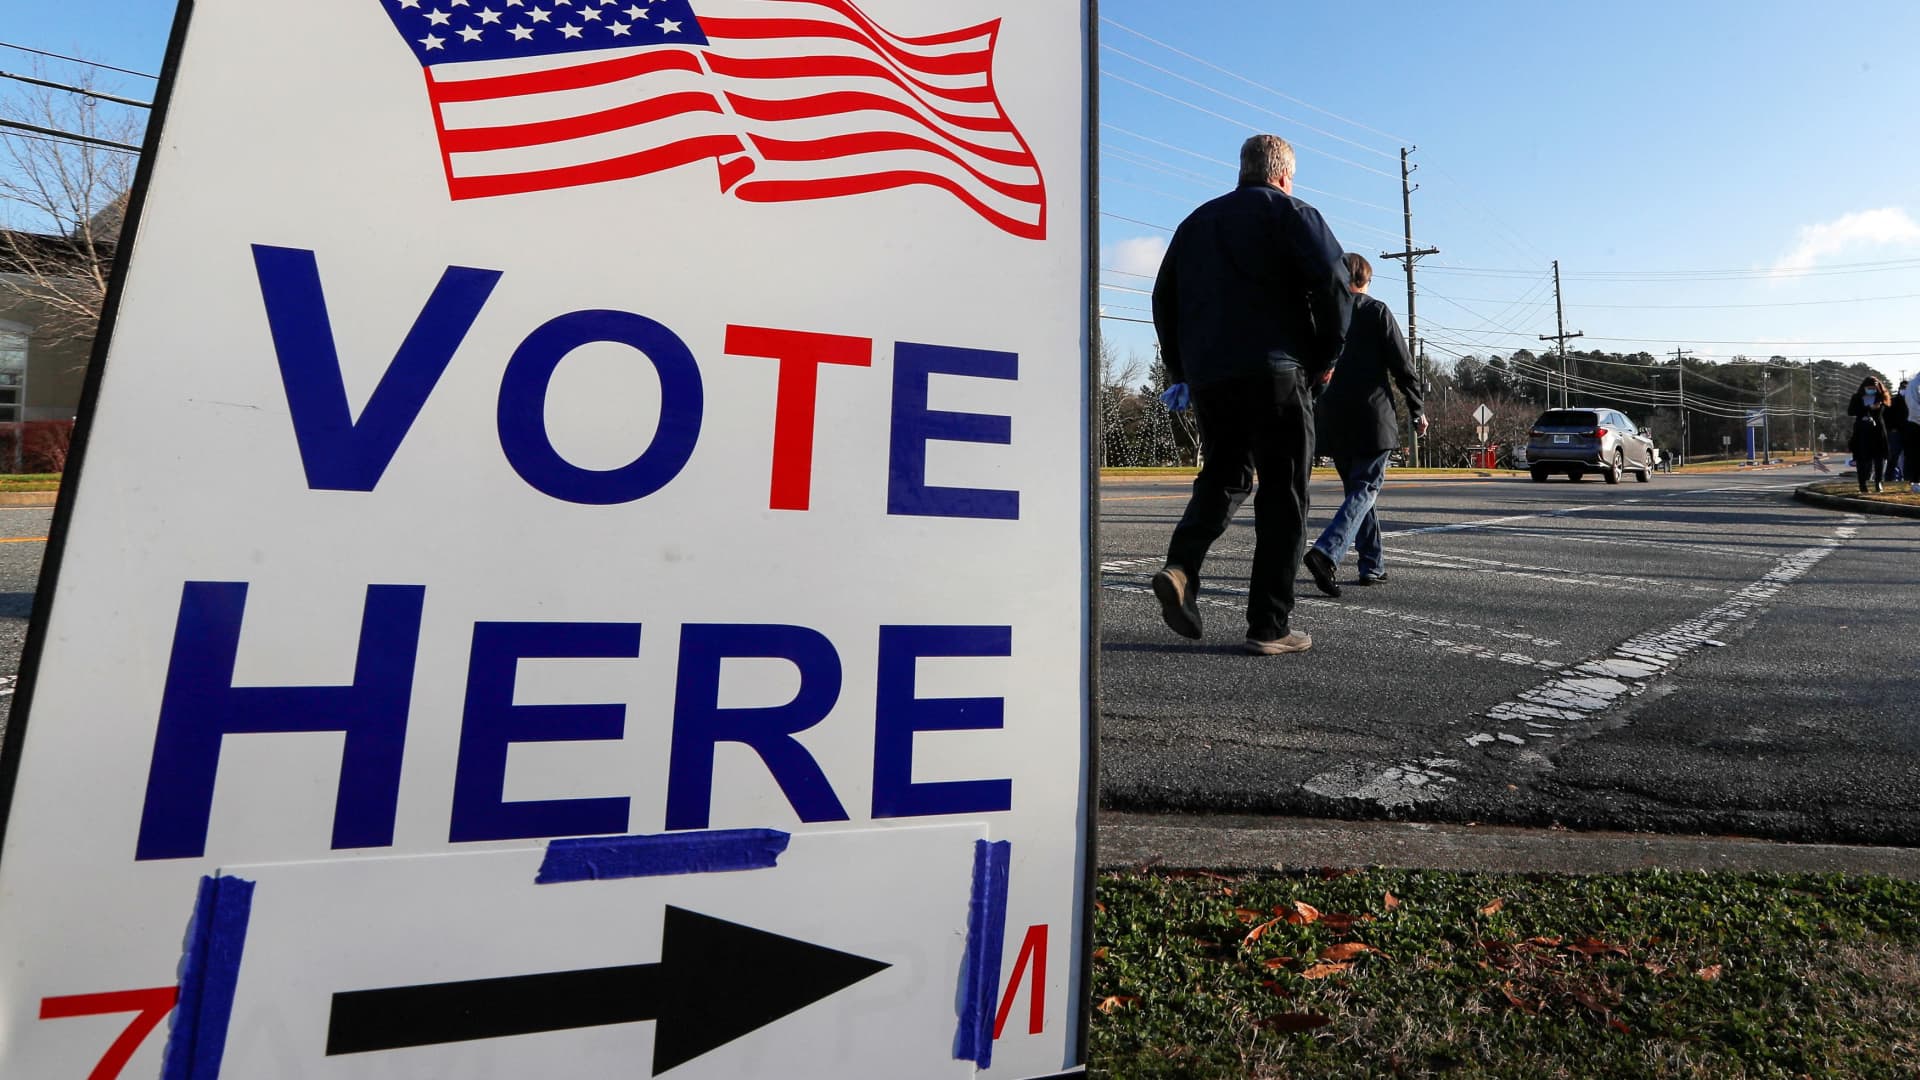 A sign is seen as voters line up for the U.S. Senate run-off election, at a polling location in Marietta, Georgia, January 5, 2021.